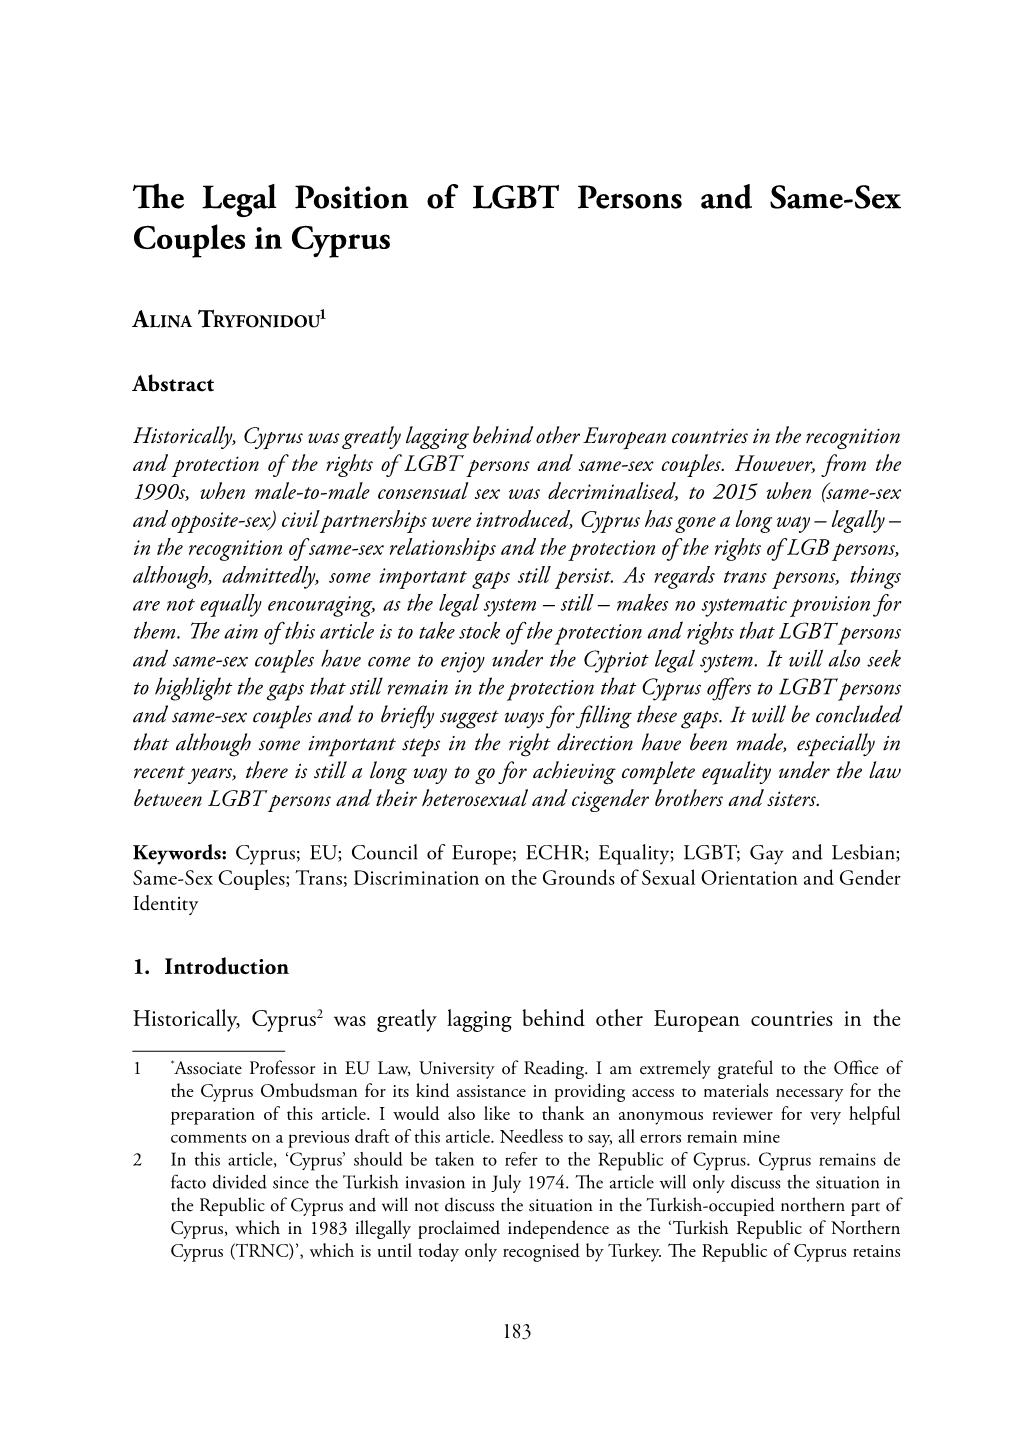 The Legal Position of LGBT Persons and Same-Sex Couples in Cyprus